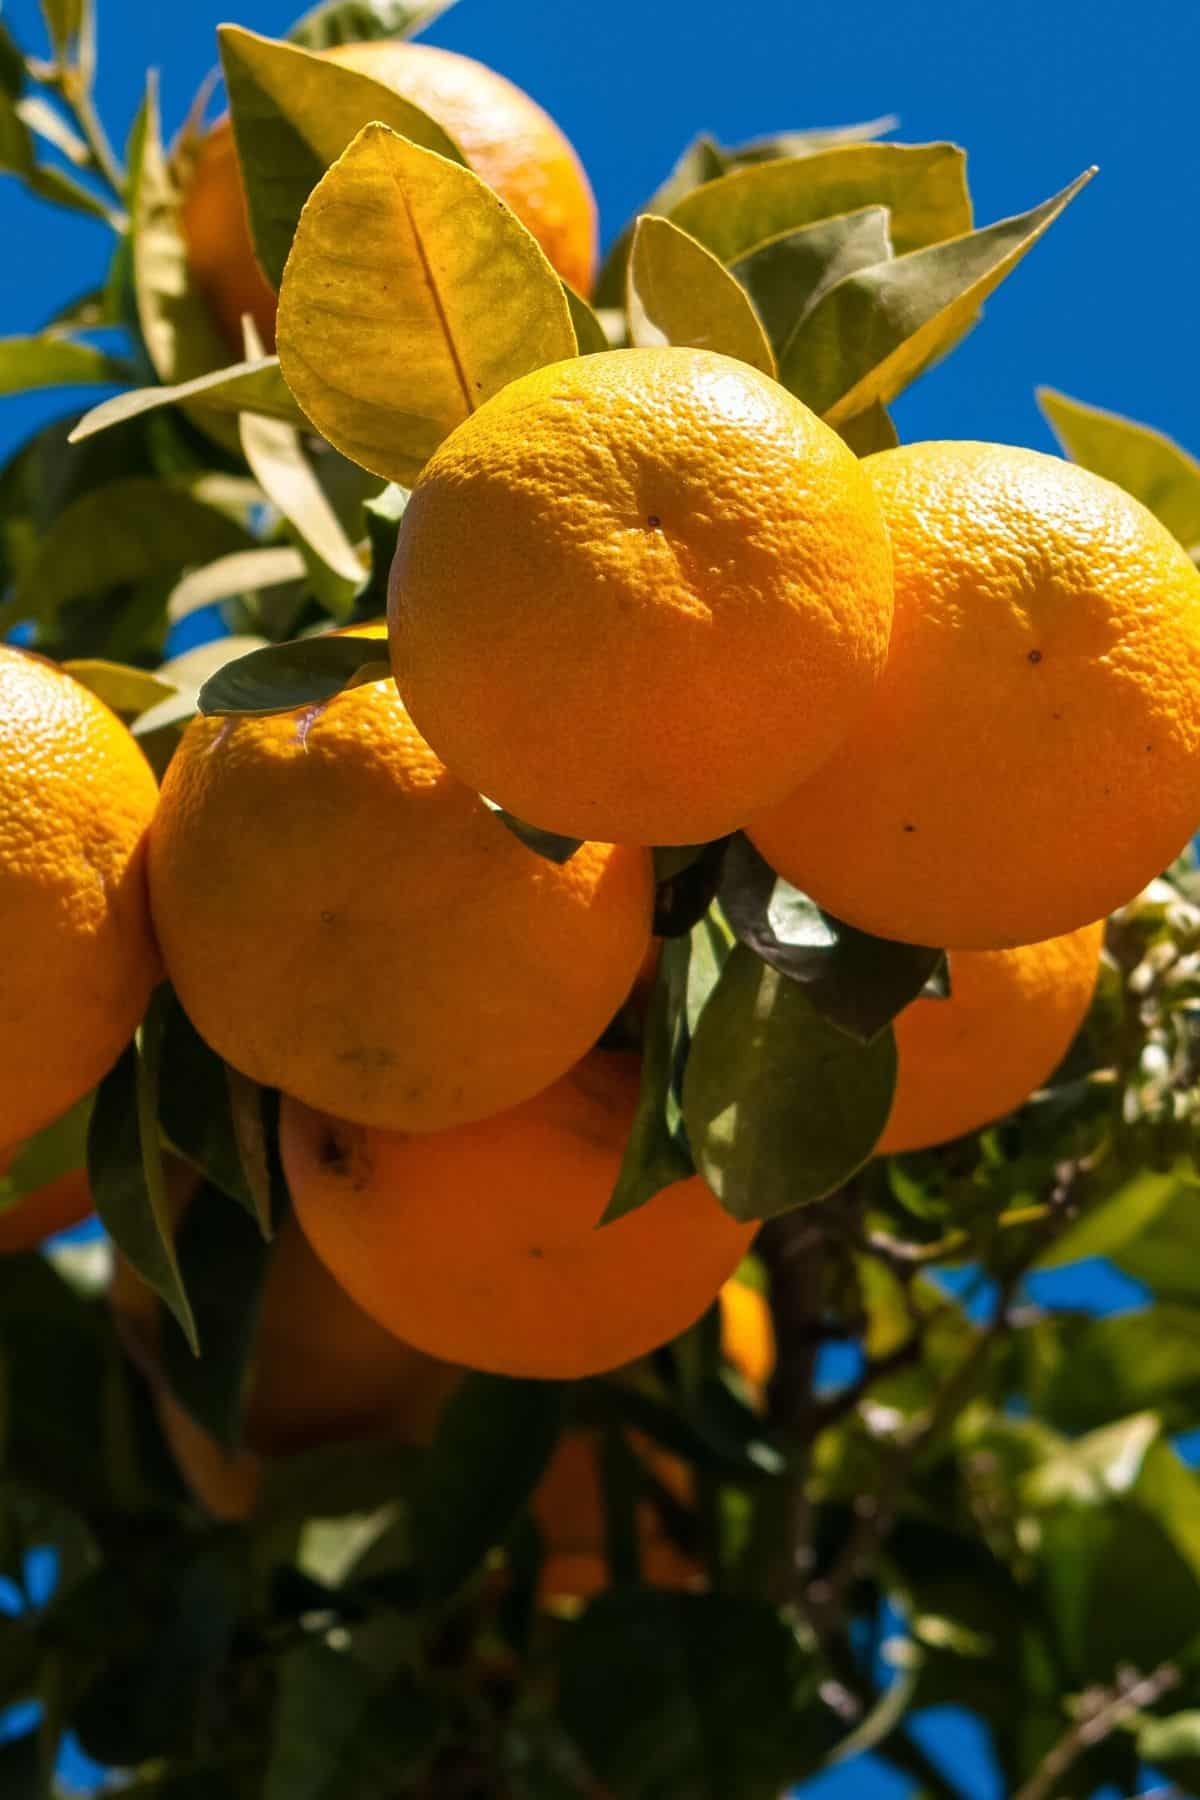 Spanish oranges in a bunch on a tree.